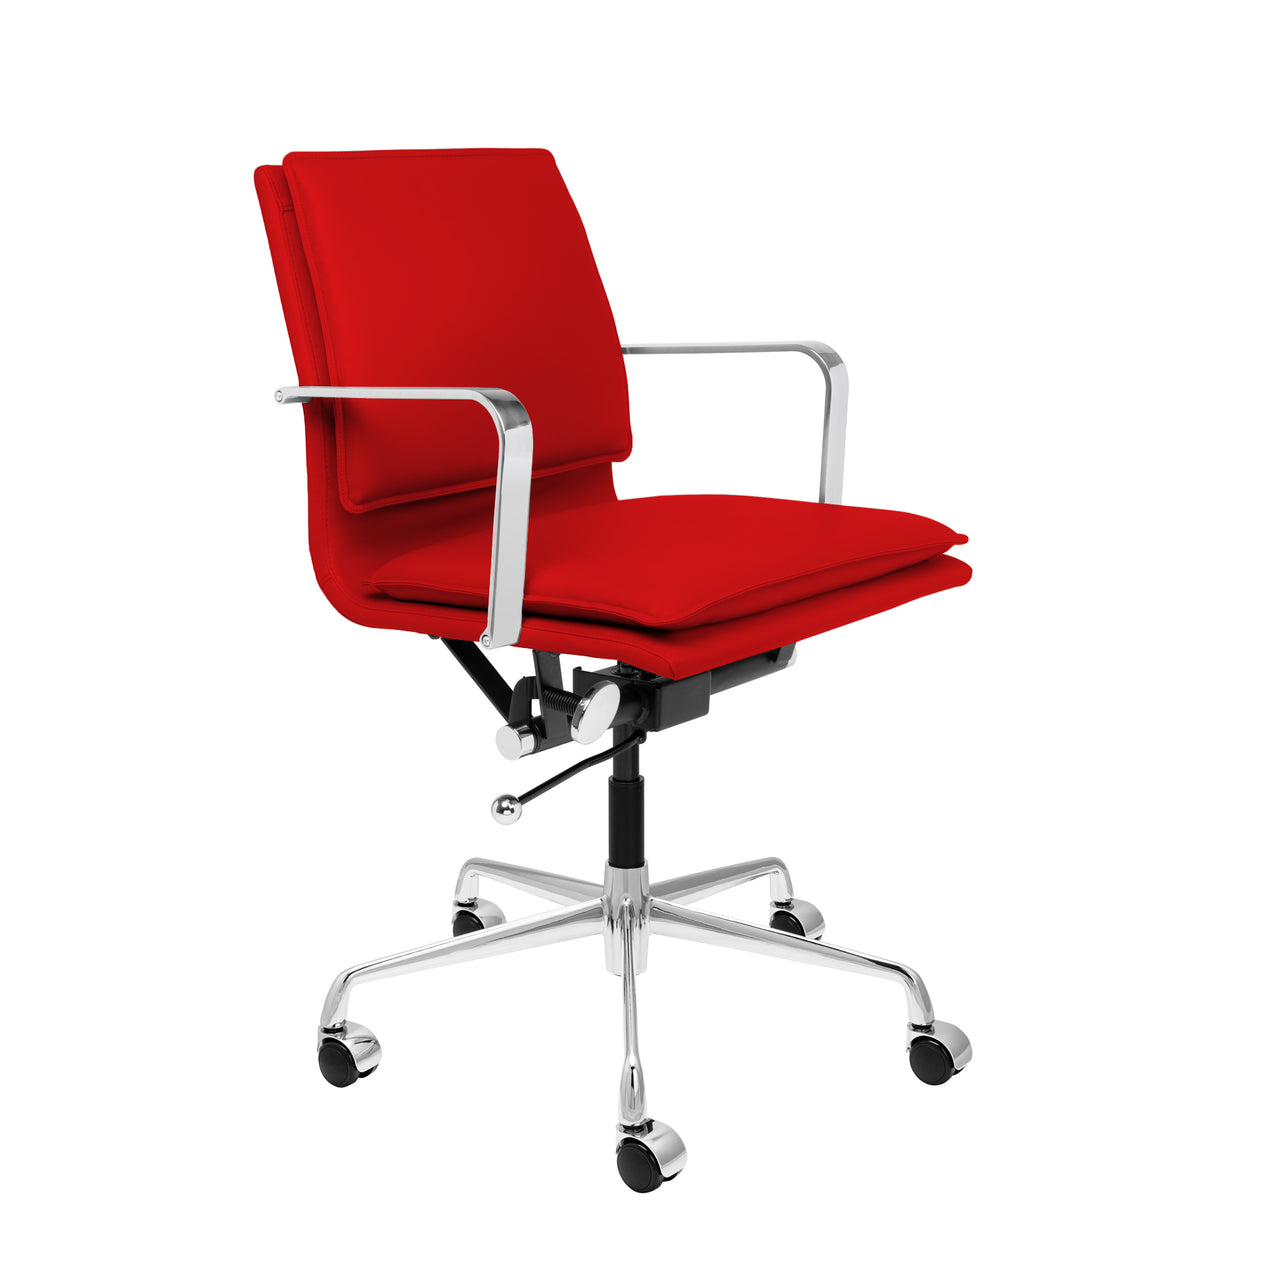 Lexi II Padded Chair (Red)